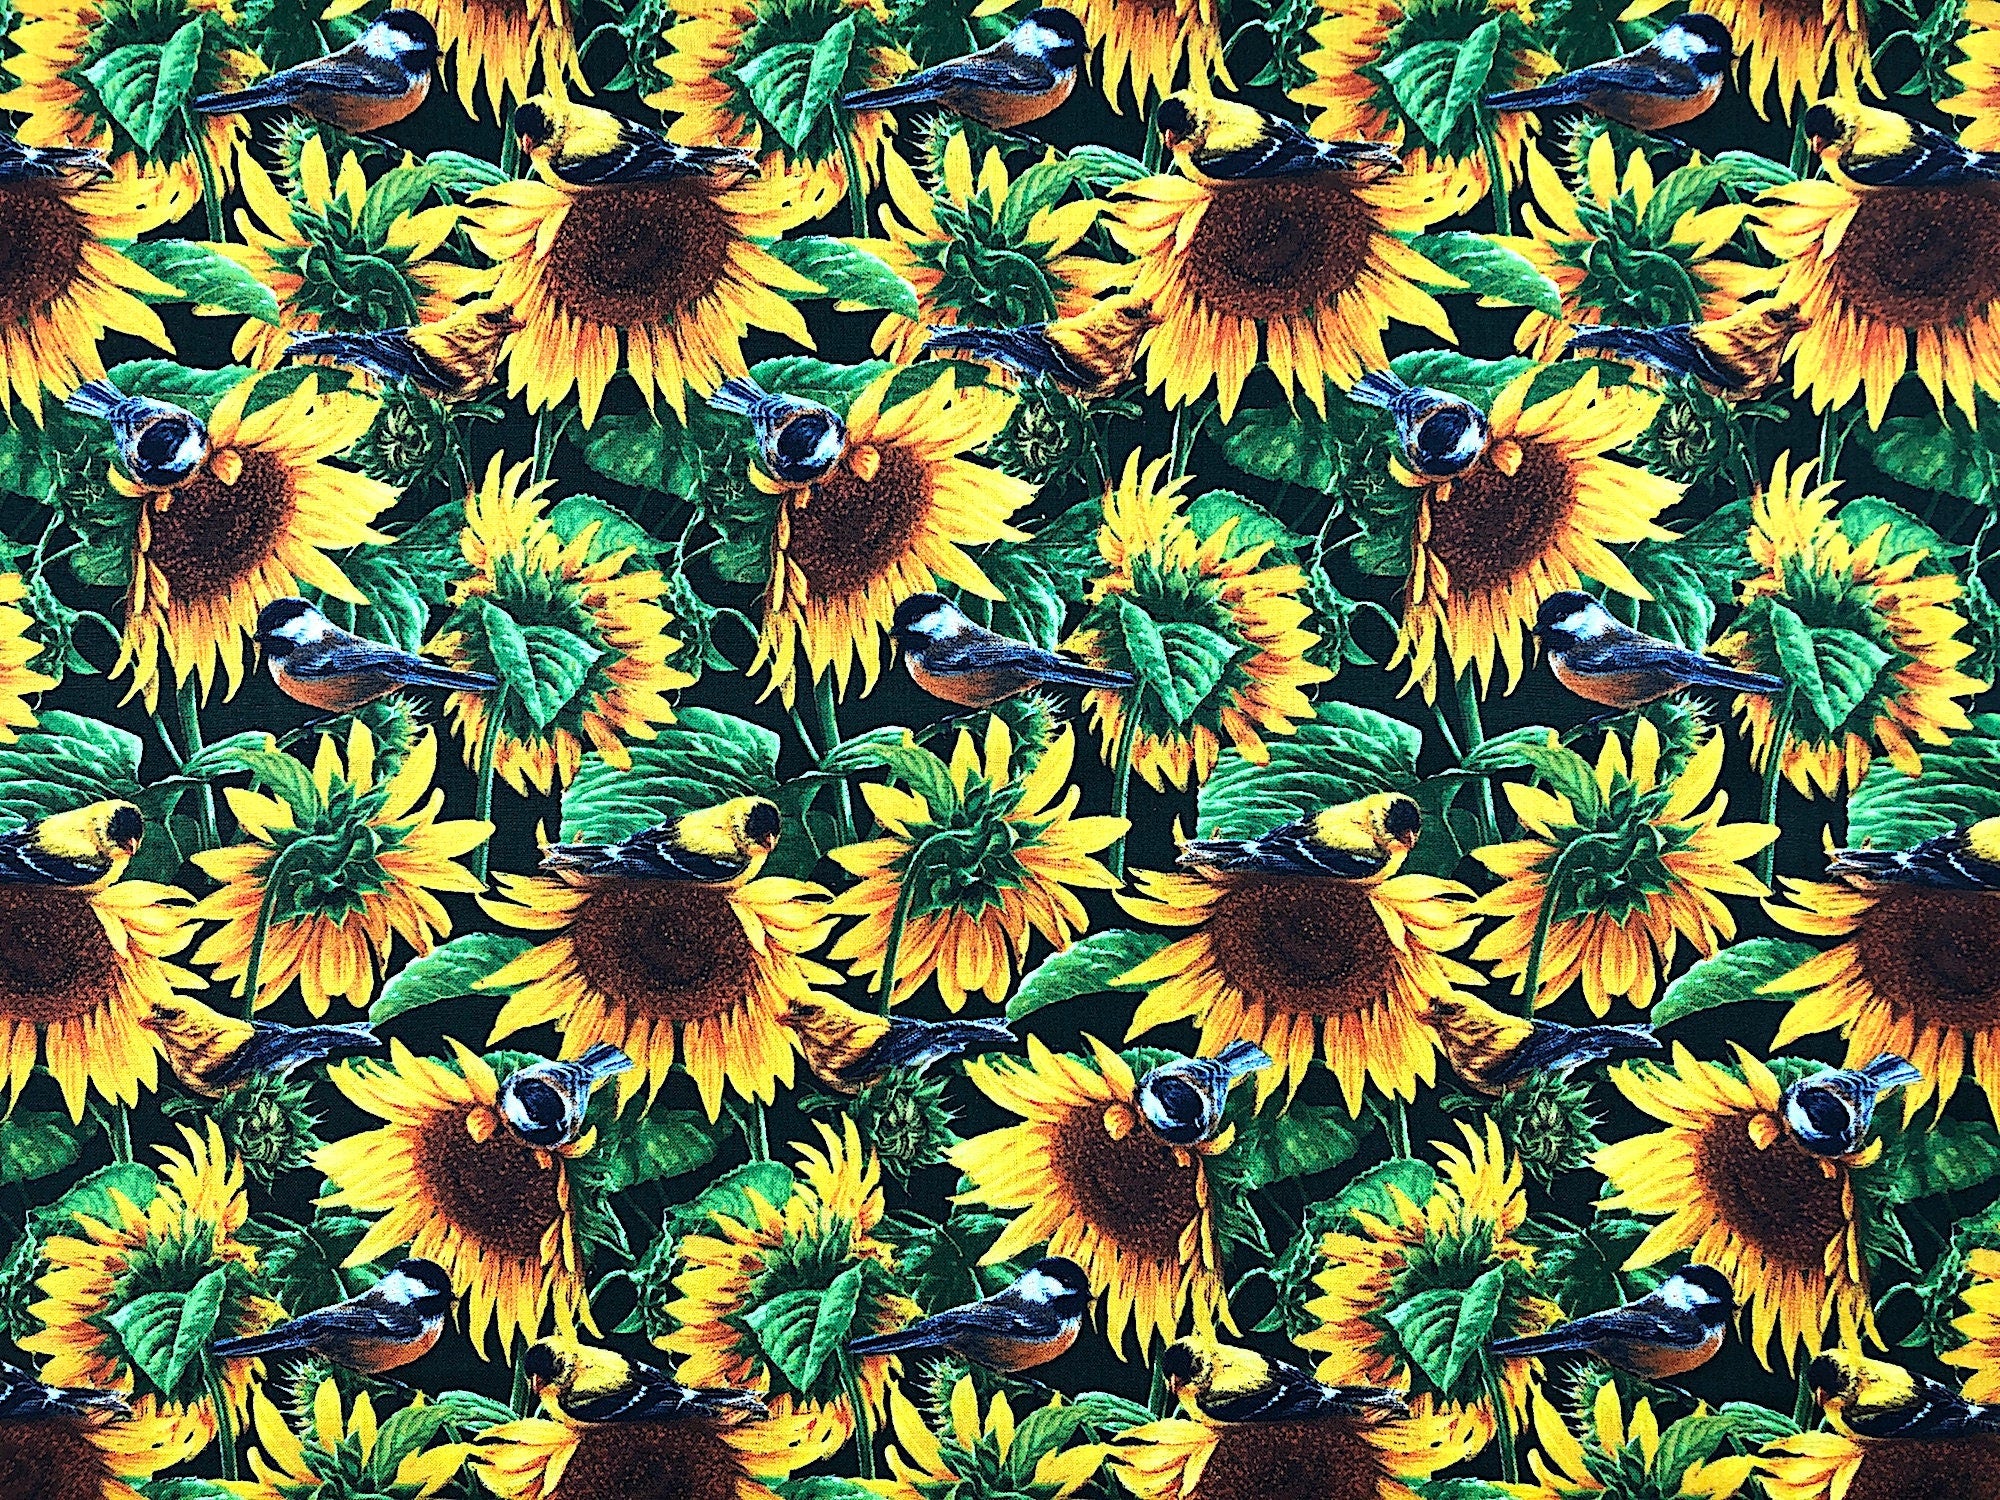 This fabric is covered with sunflowers, leaves and birds.